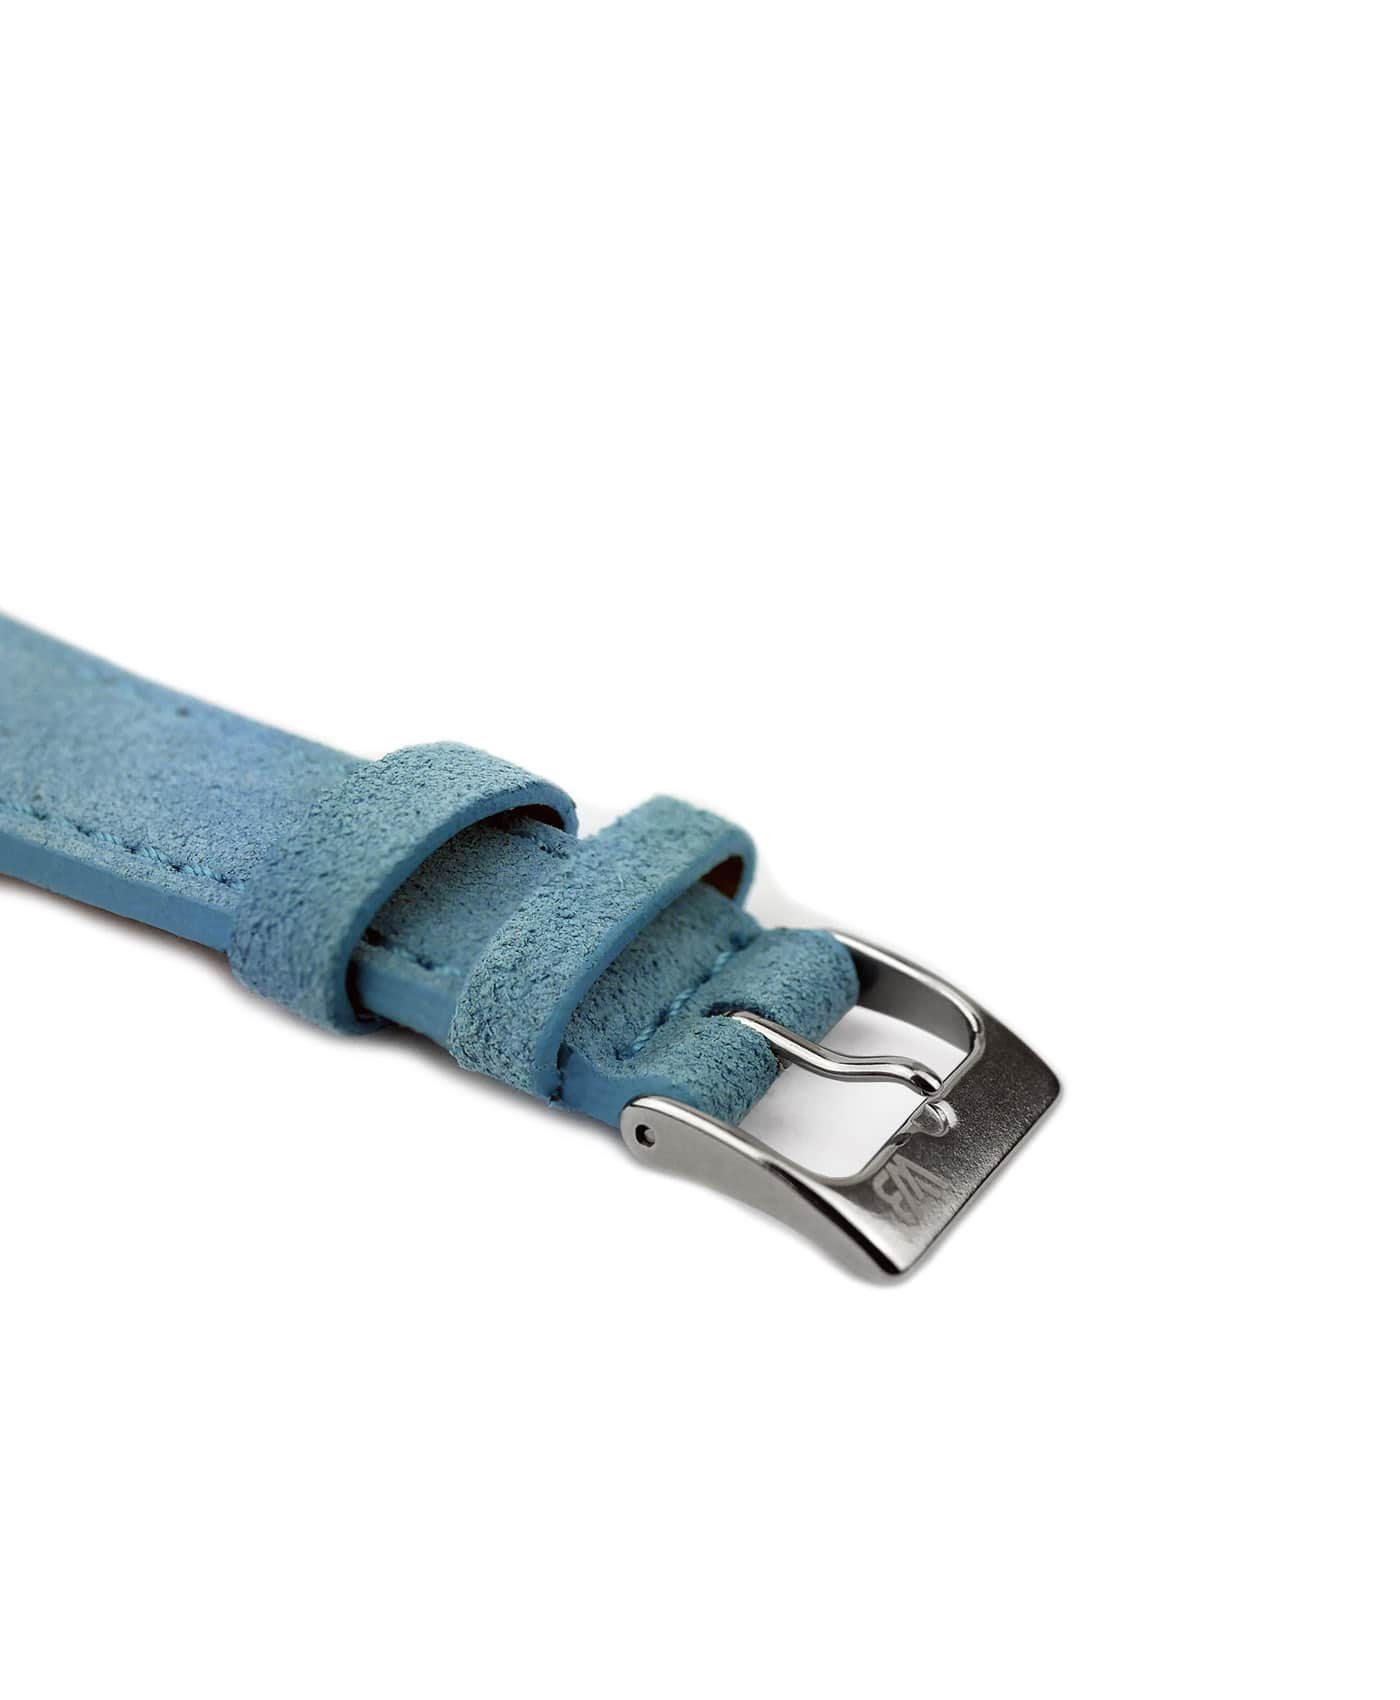 Classic stitching suede leather strap_light blue_side buckle